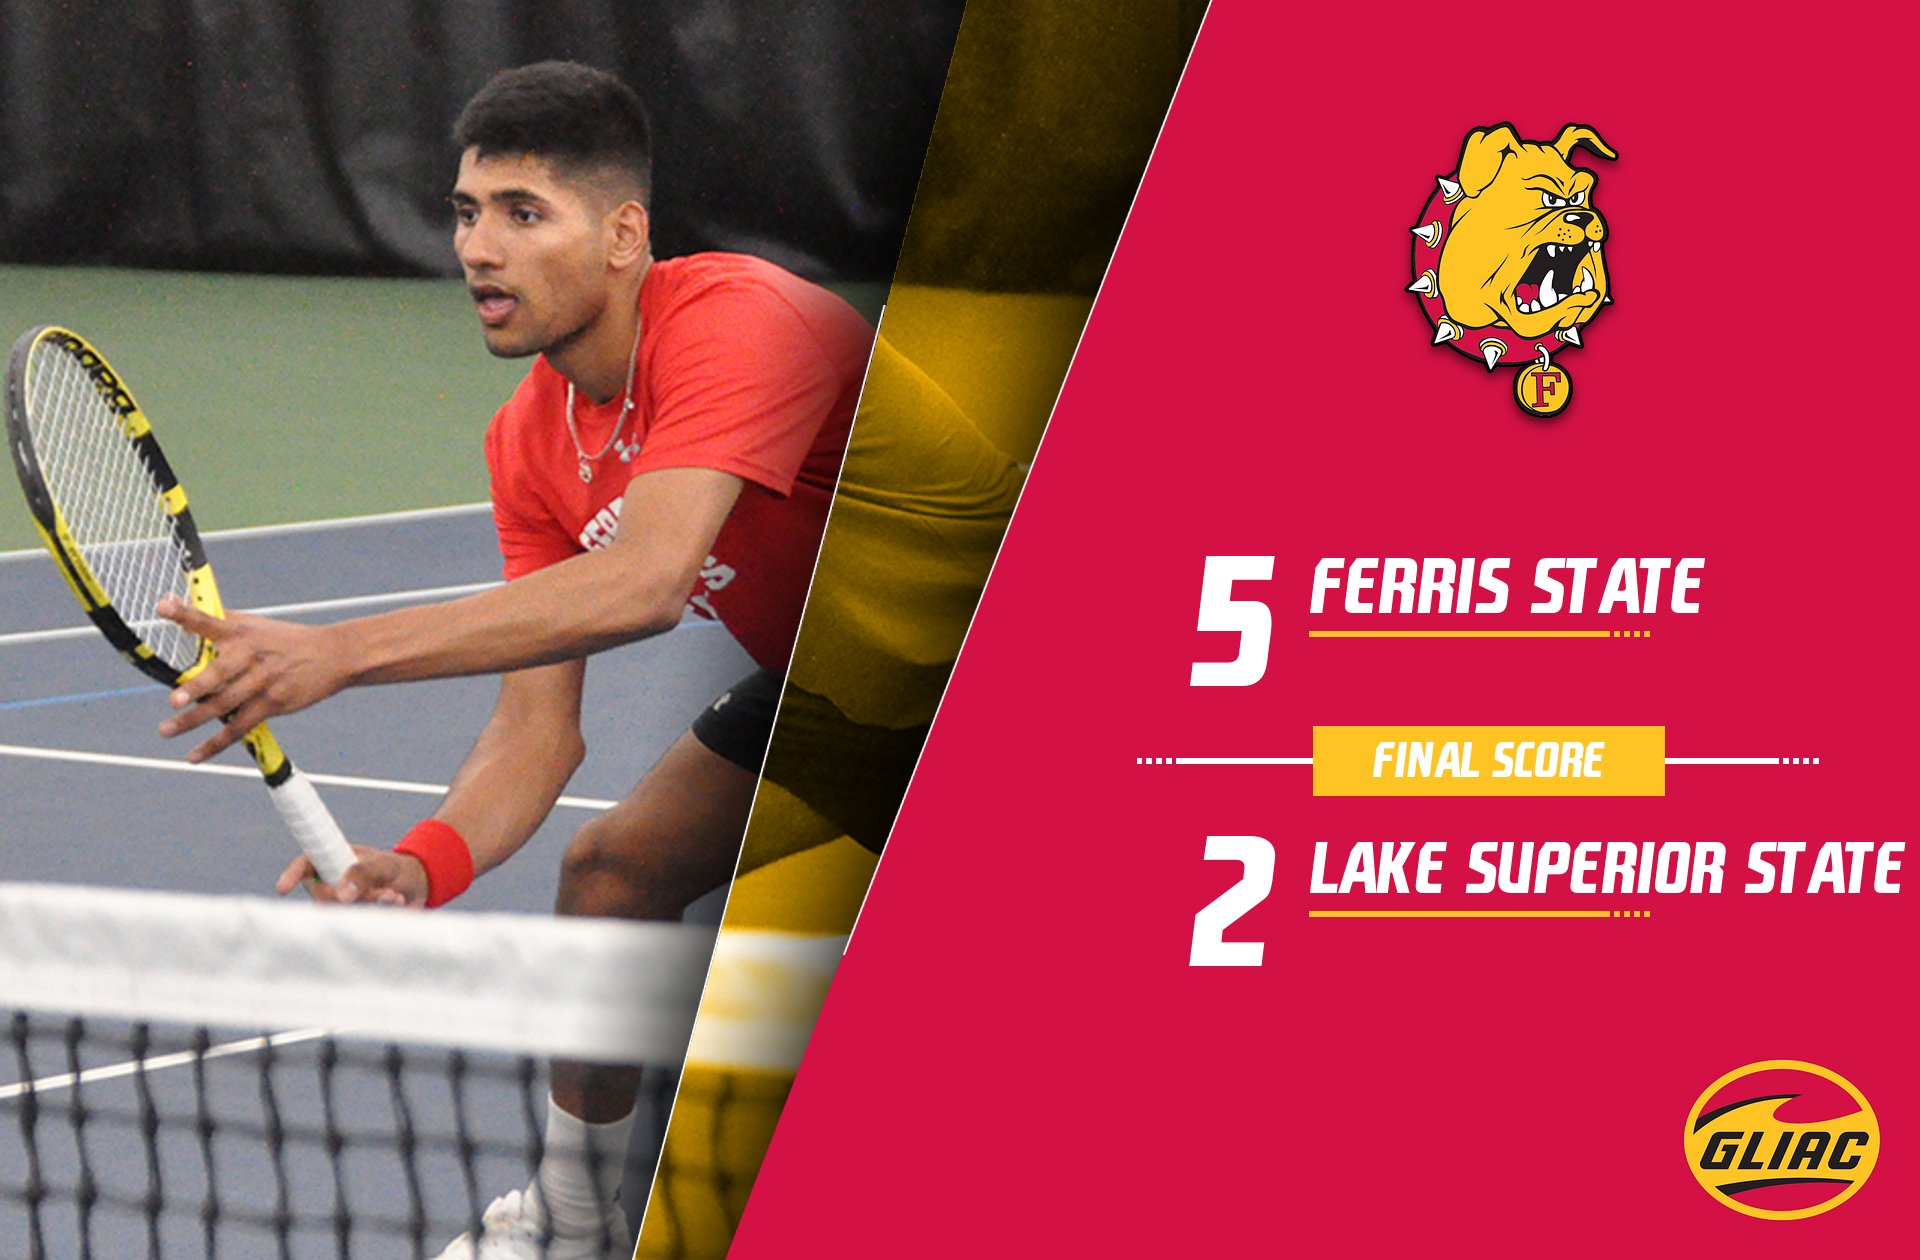 Ferris State Men's Tennis Moves Closer To GLIAC Outright Championship With Victory